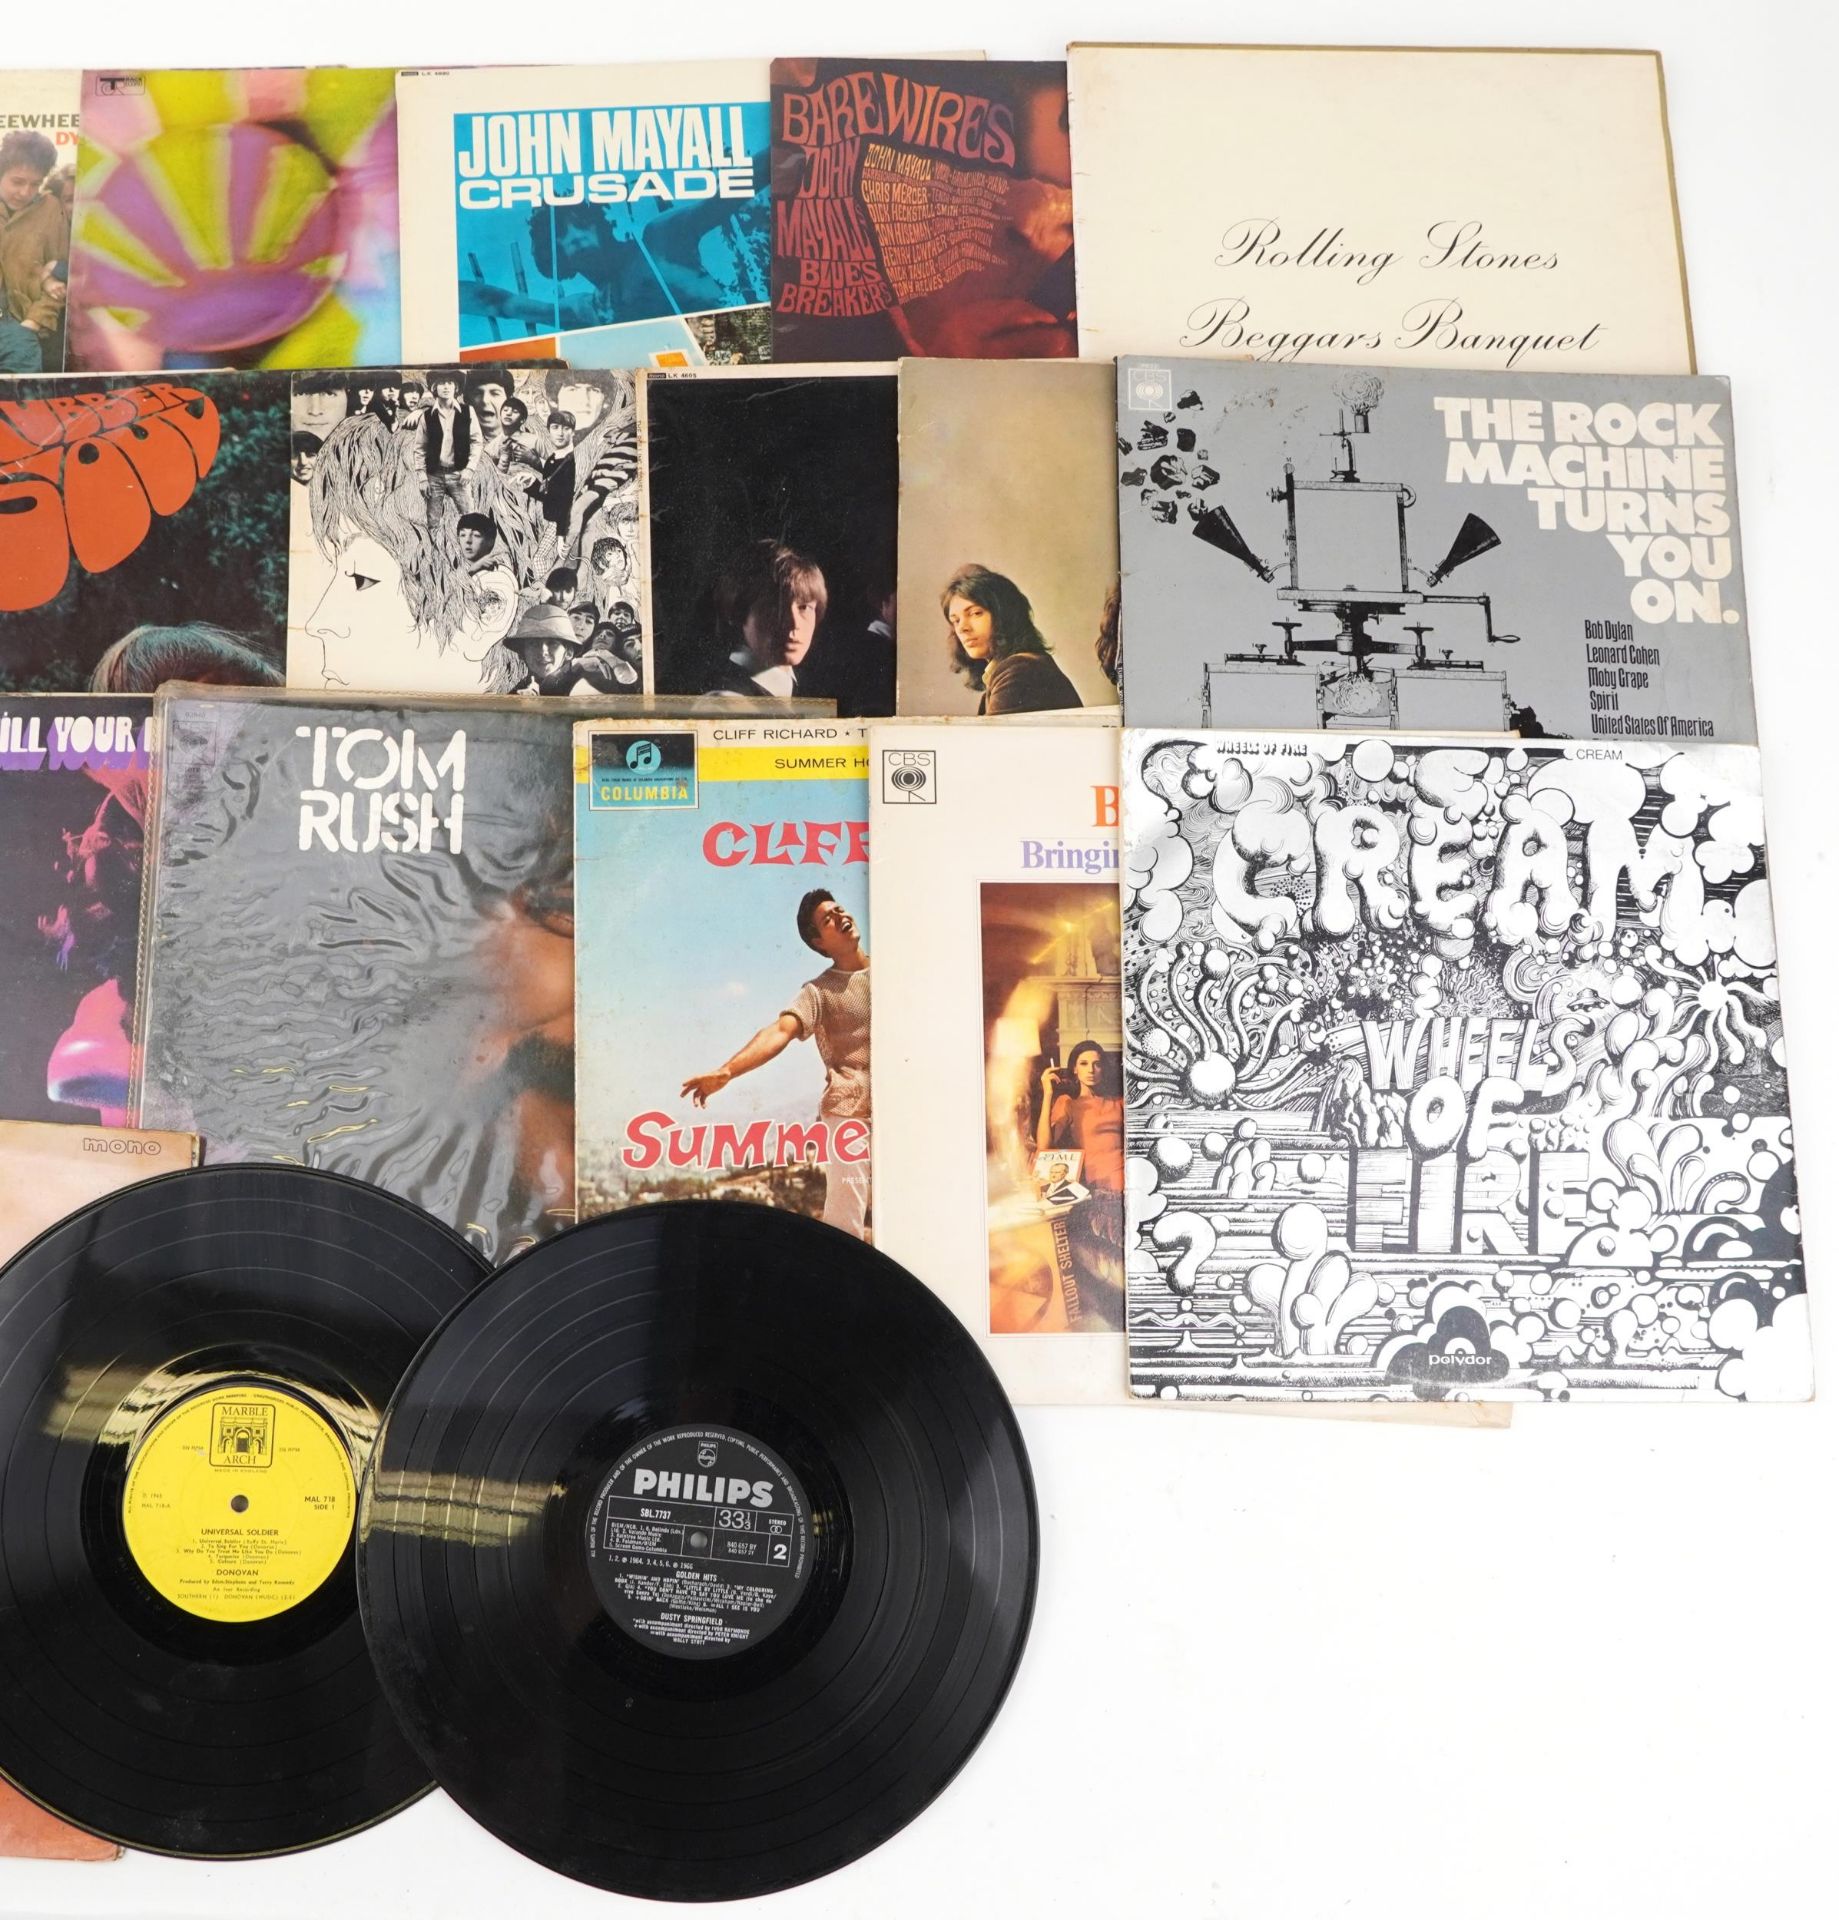 Vinyl LP records including Bob Dylan, John Mayall, The Rolling Stones, Cat Stevens, The Beatles - Image 5 of 7